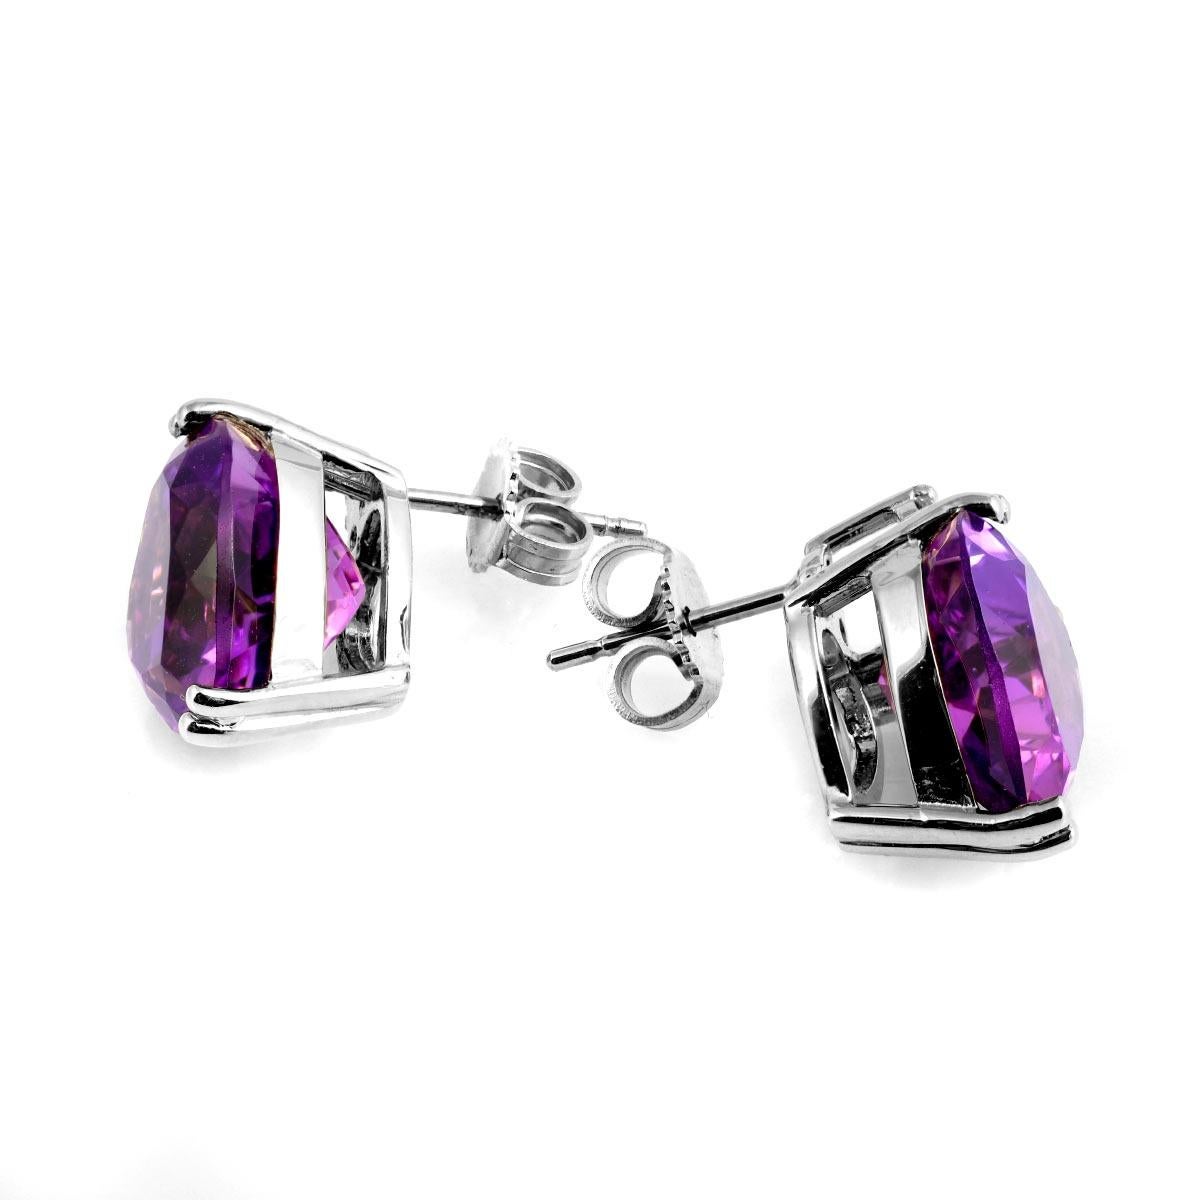 Mixed Cut Natural Amethyst 7.98 Carats set in 14K White Gold Earrings with Diamonds For Sale